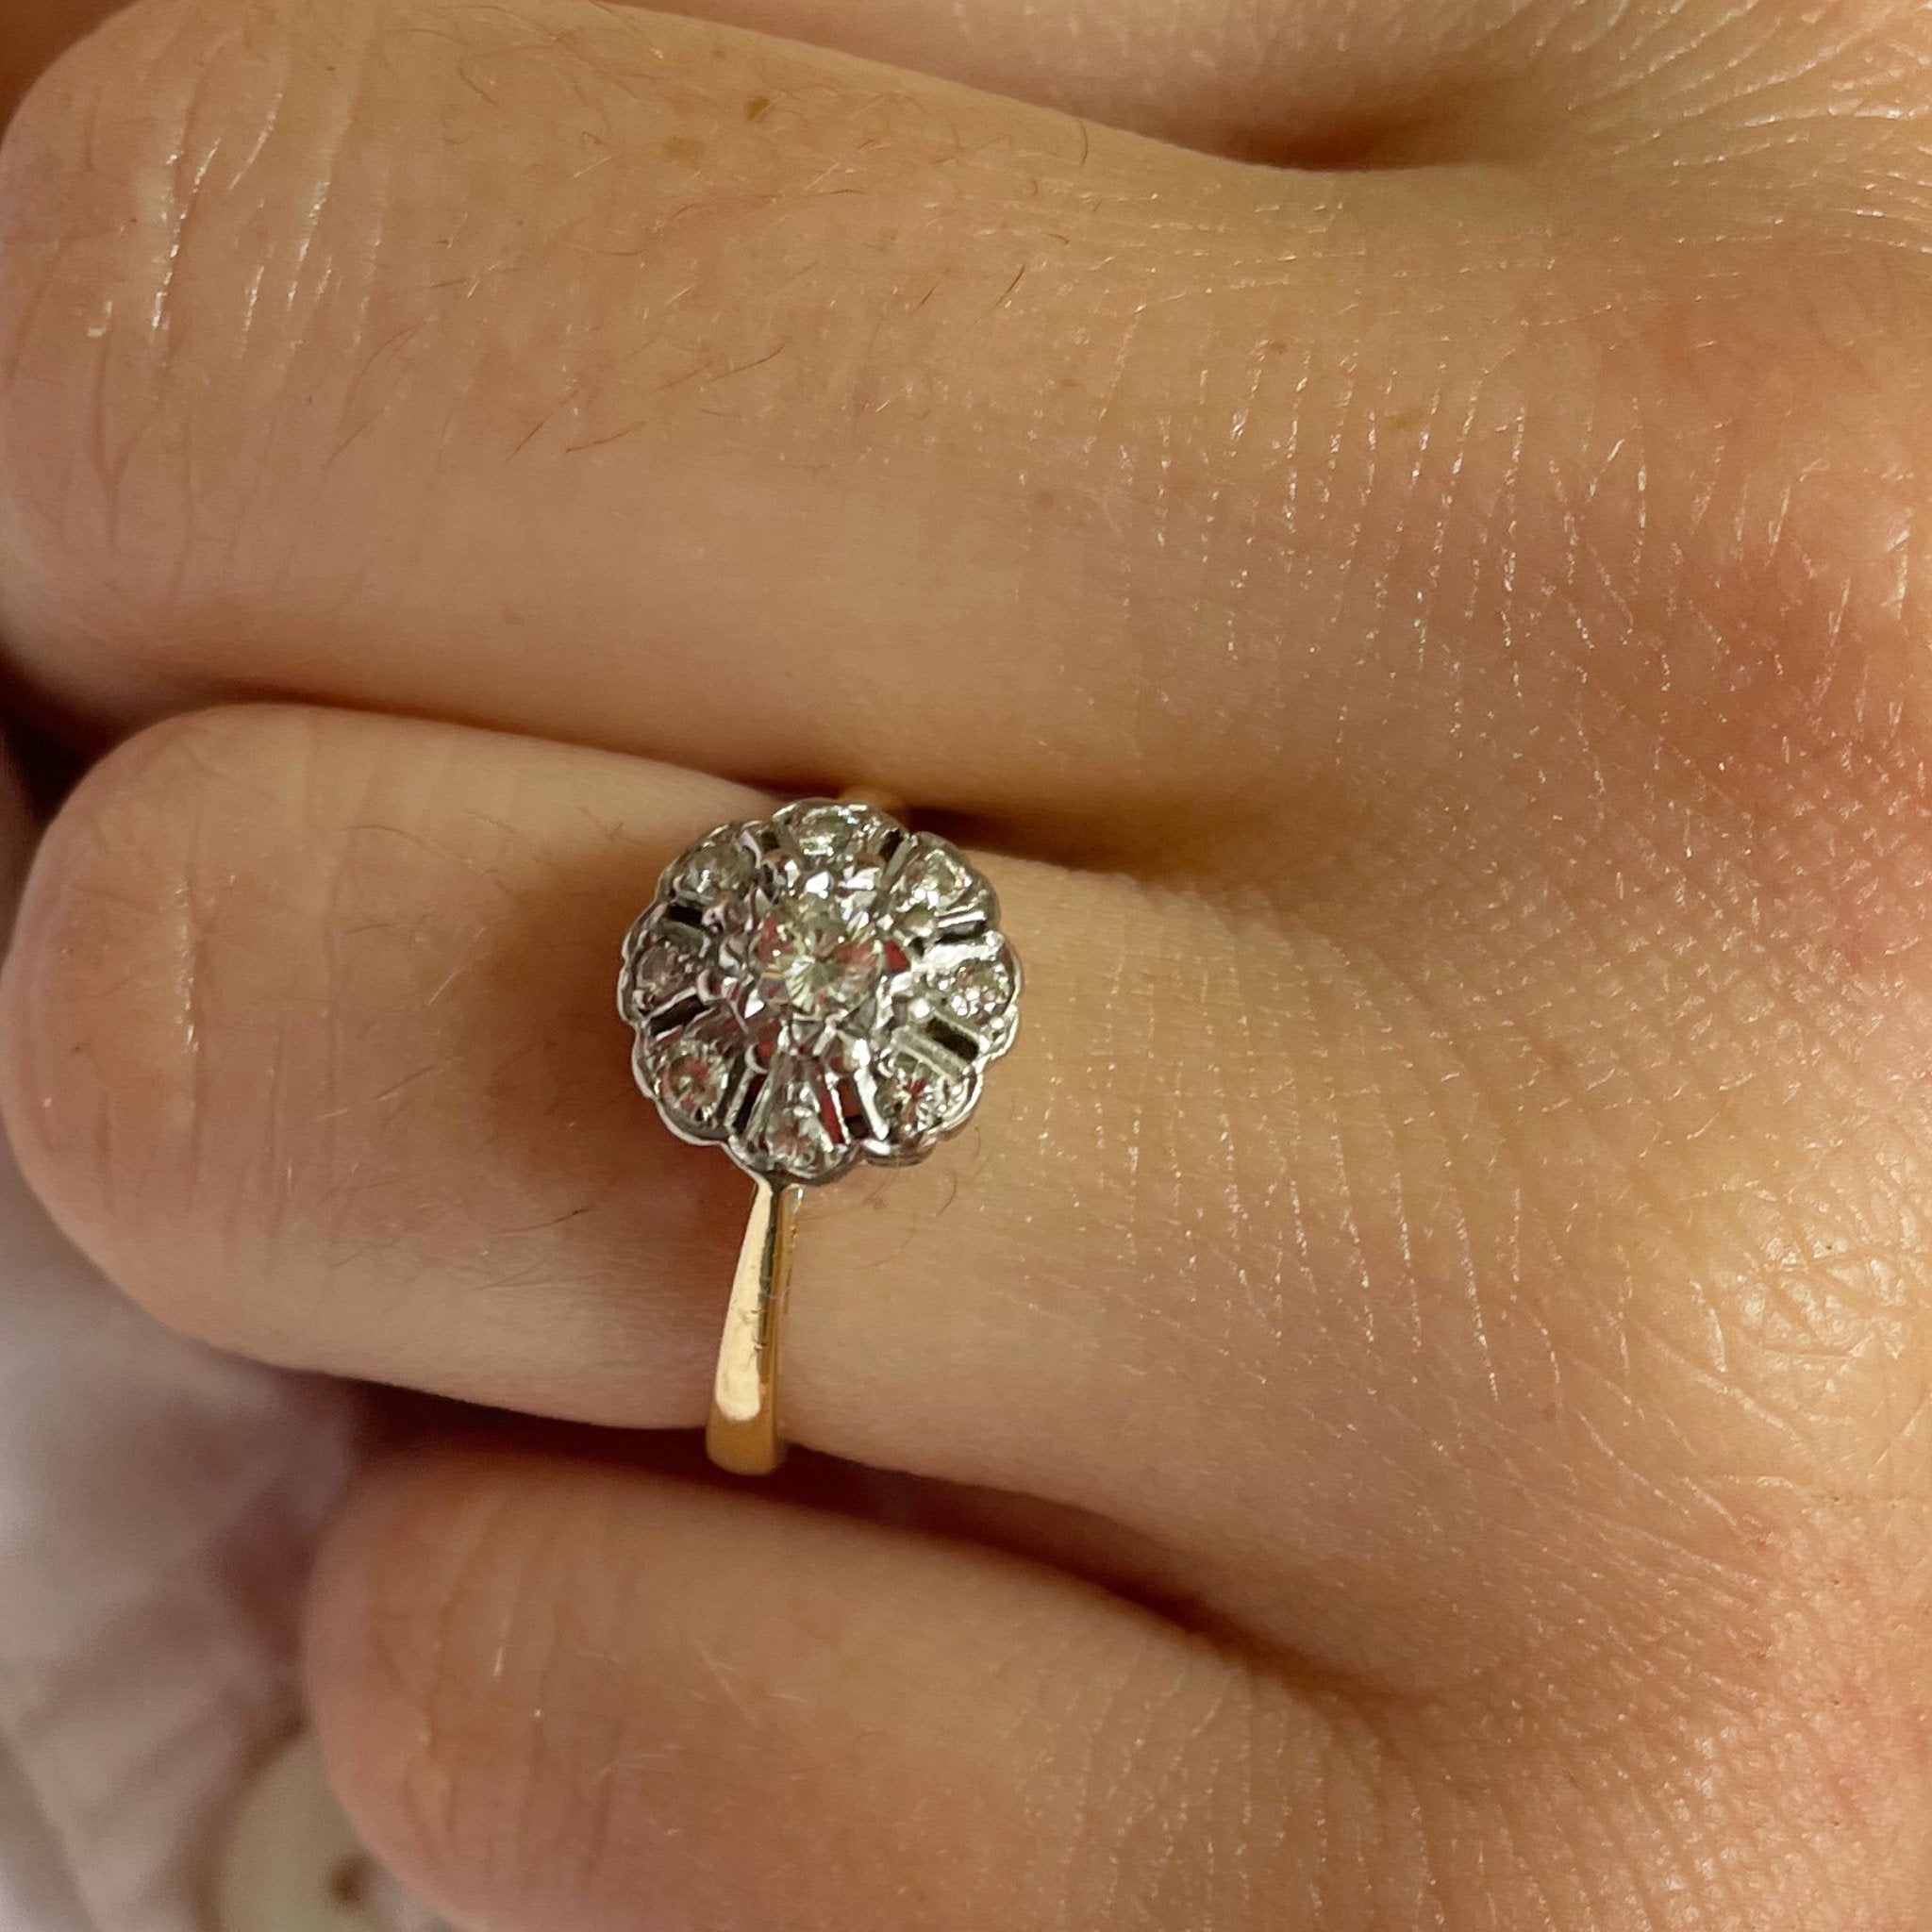 A Diamond Cluster Ring, Should You Buy One? – All Diamond